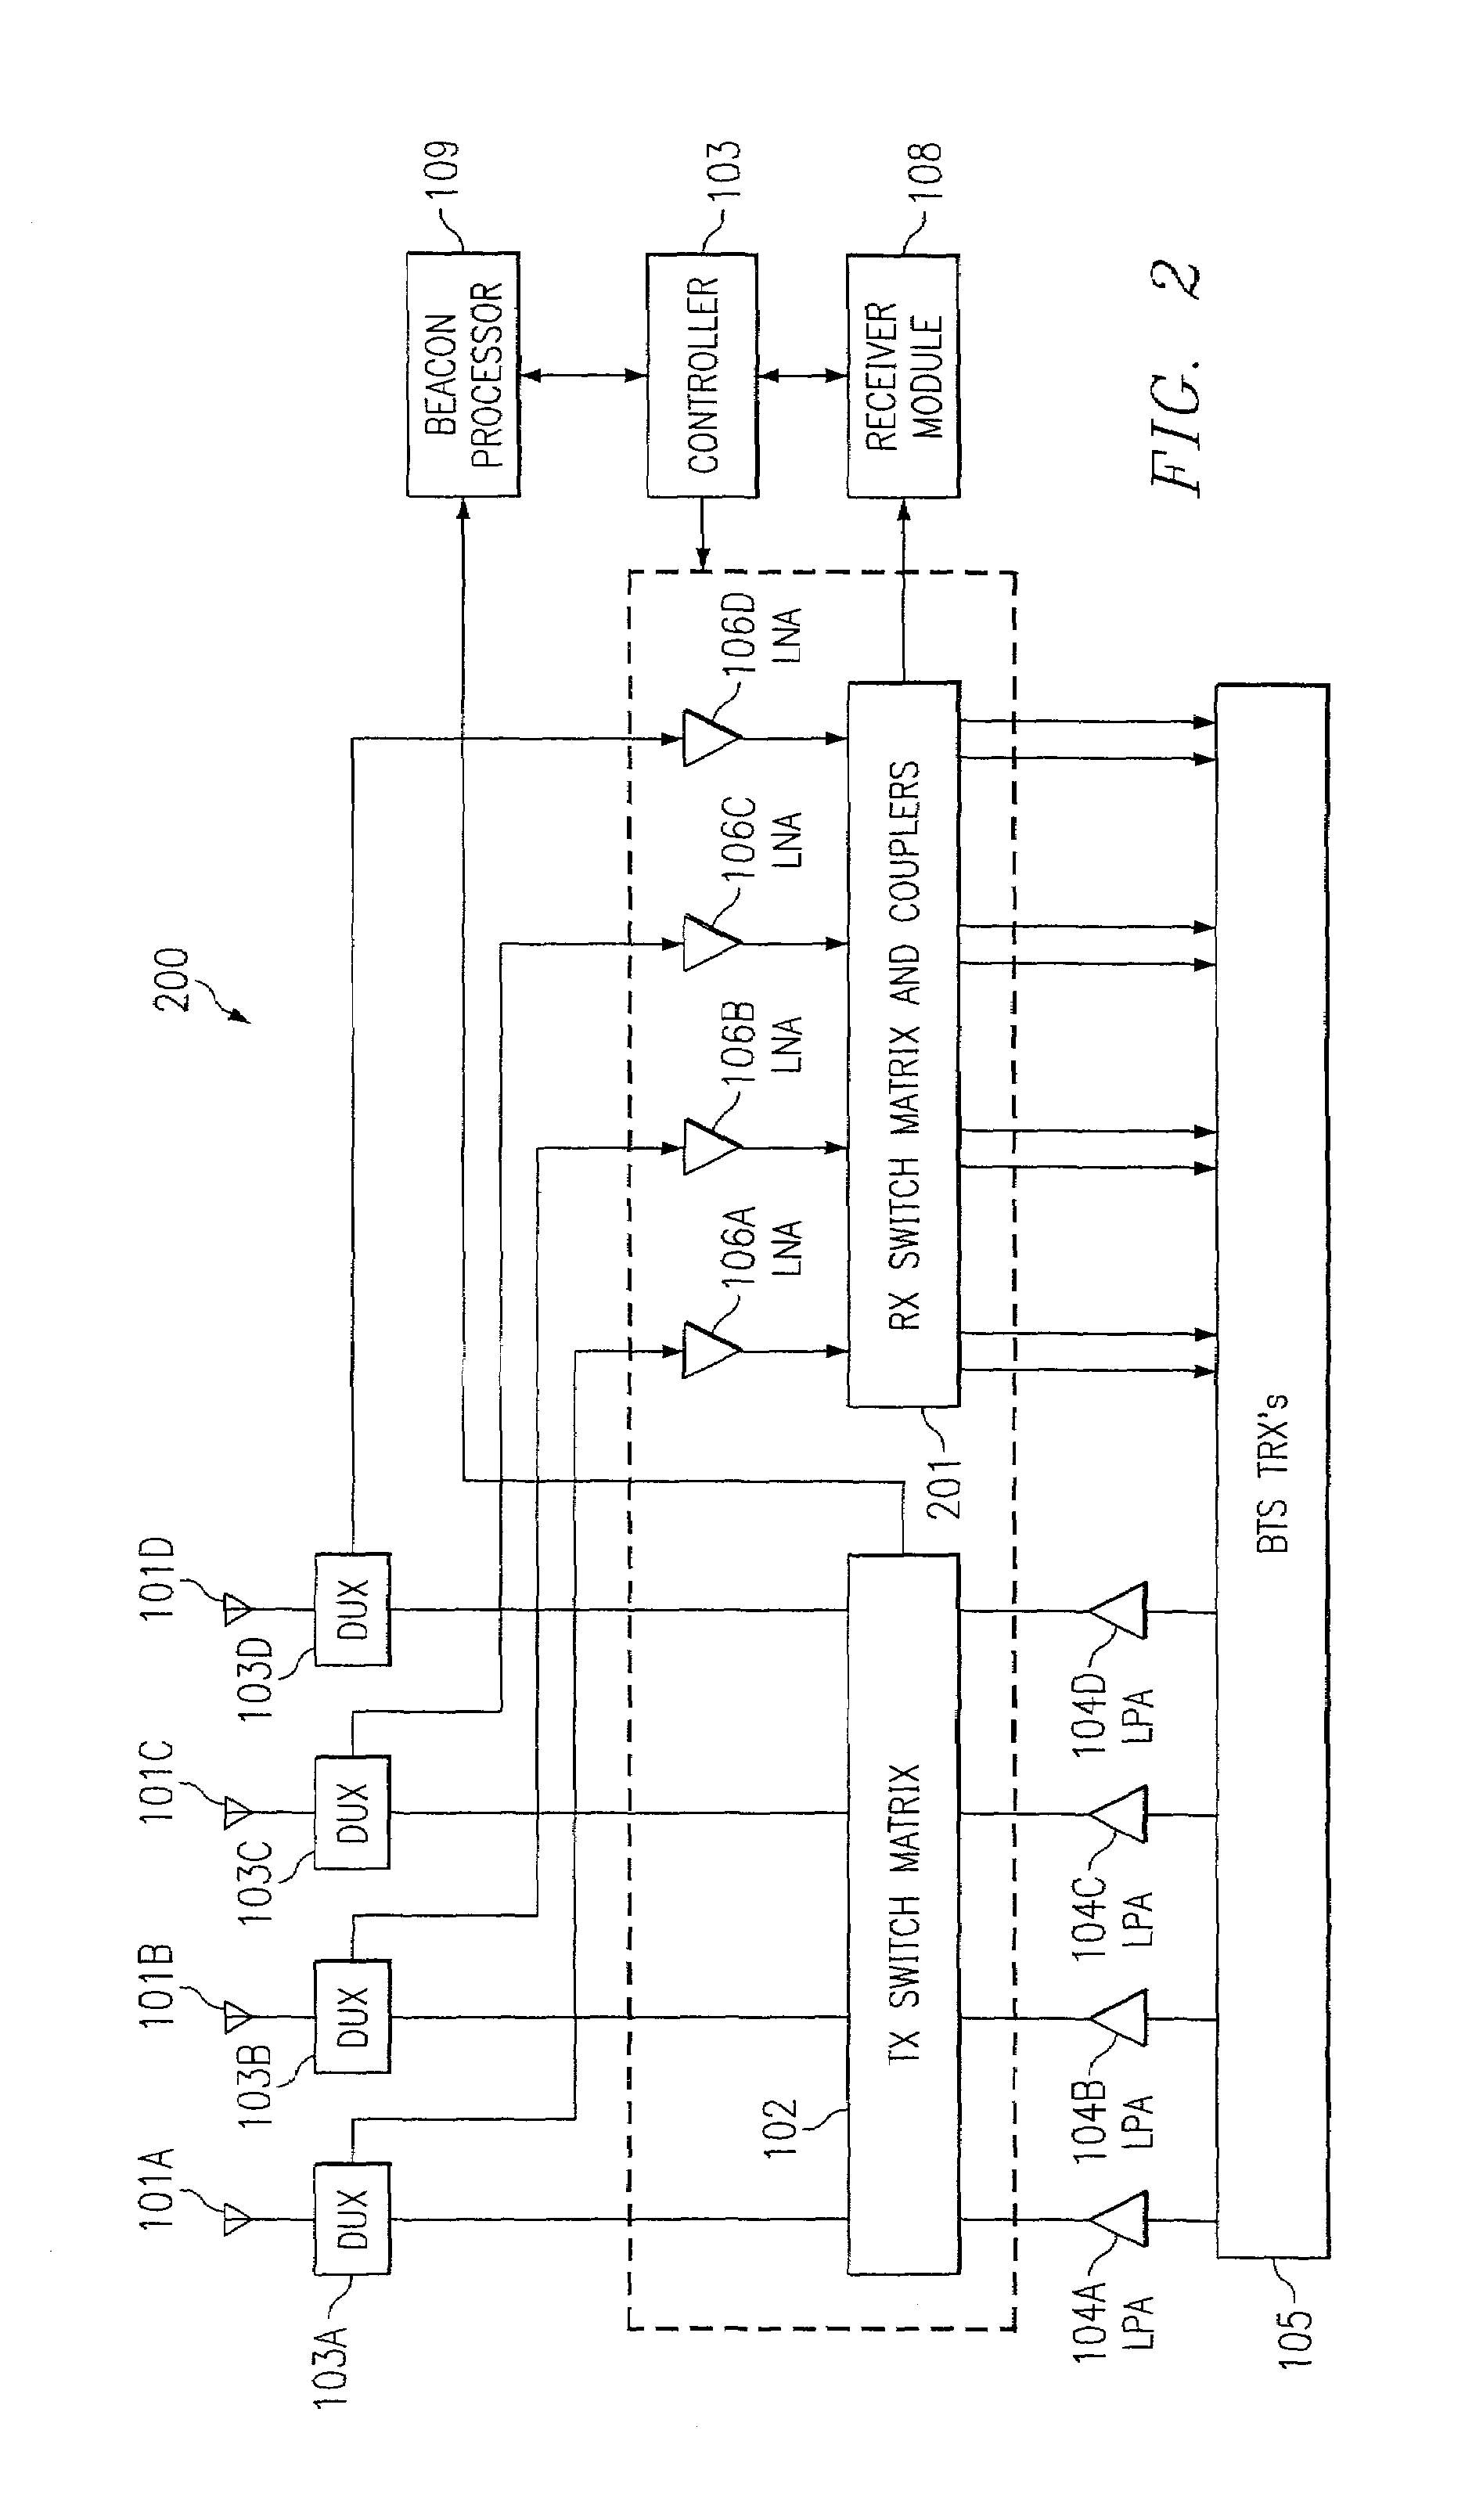 Systems and methods for providing improved wireless signal quality using diverse antenna beams